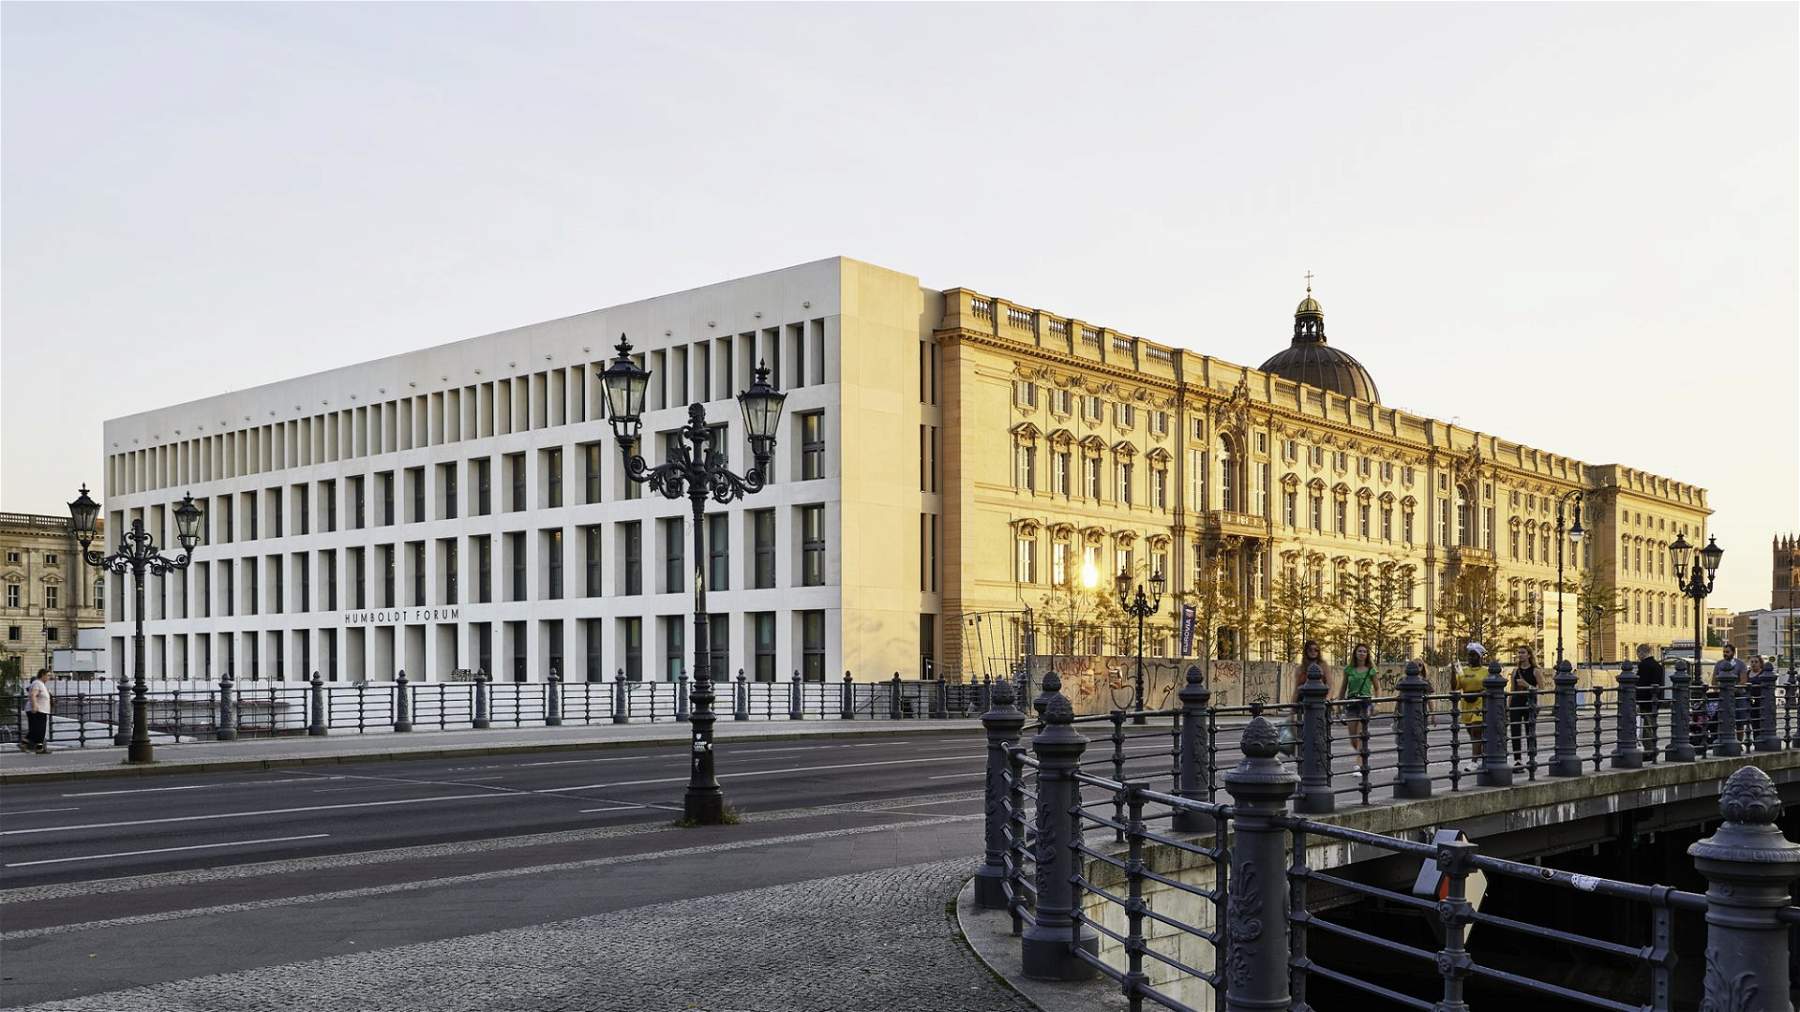 A huge new museum is opening in Berlin: the Humboldt Forum. It is Germany's 